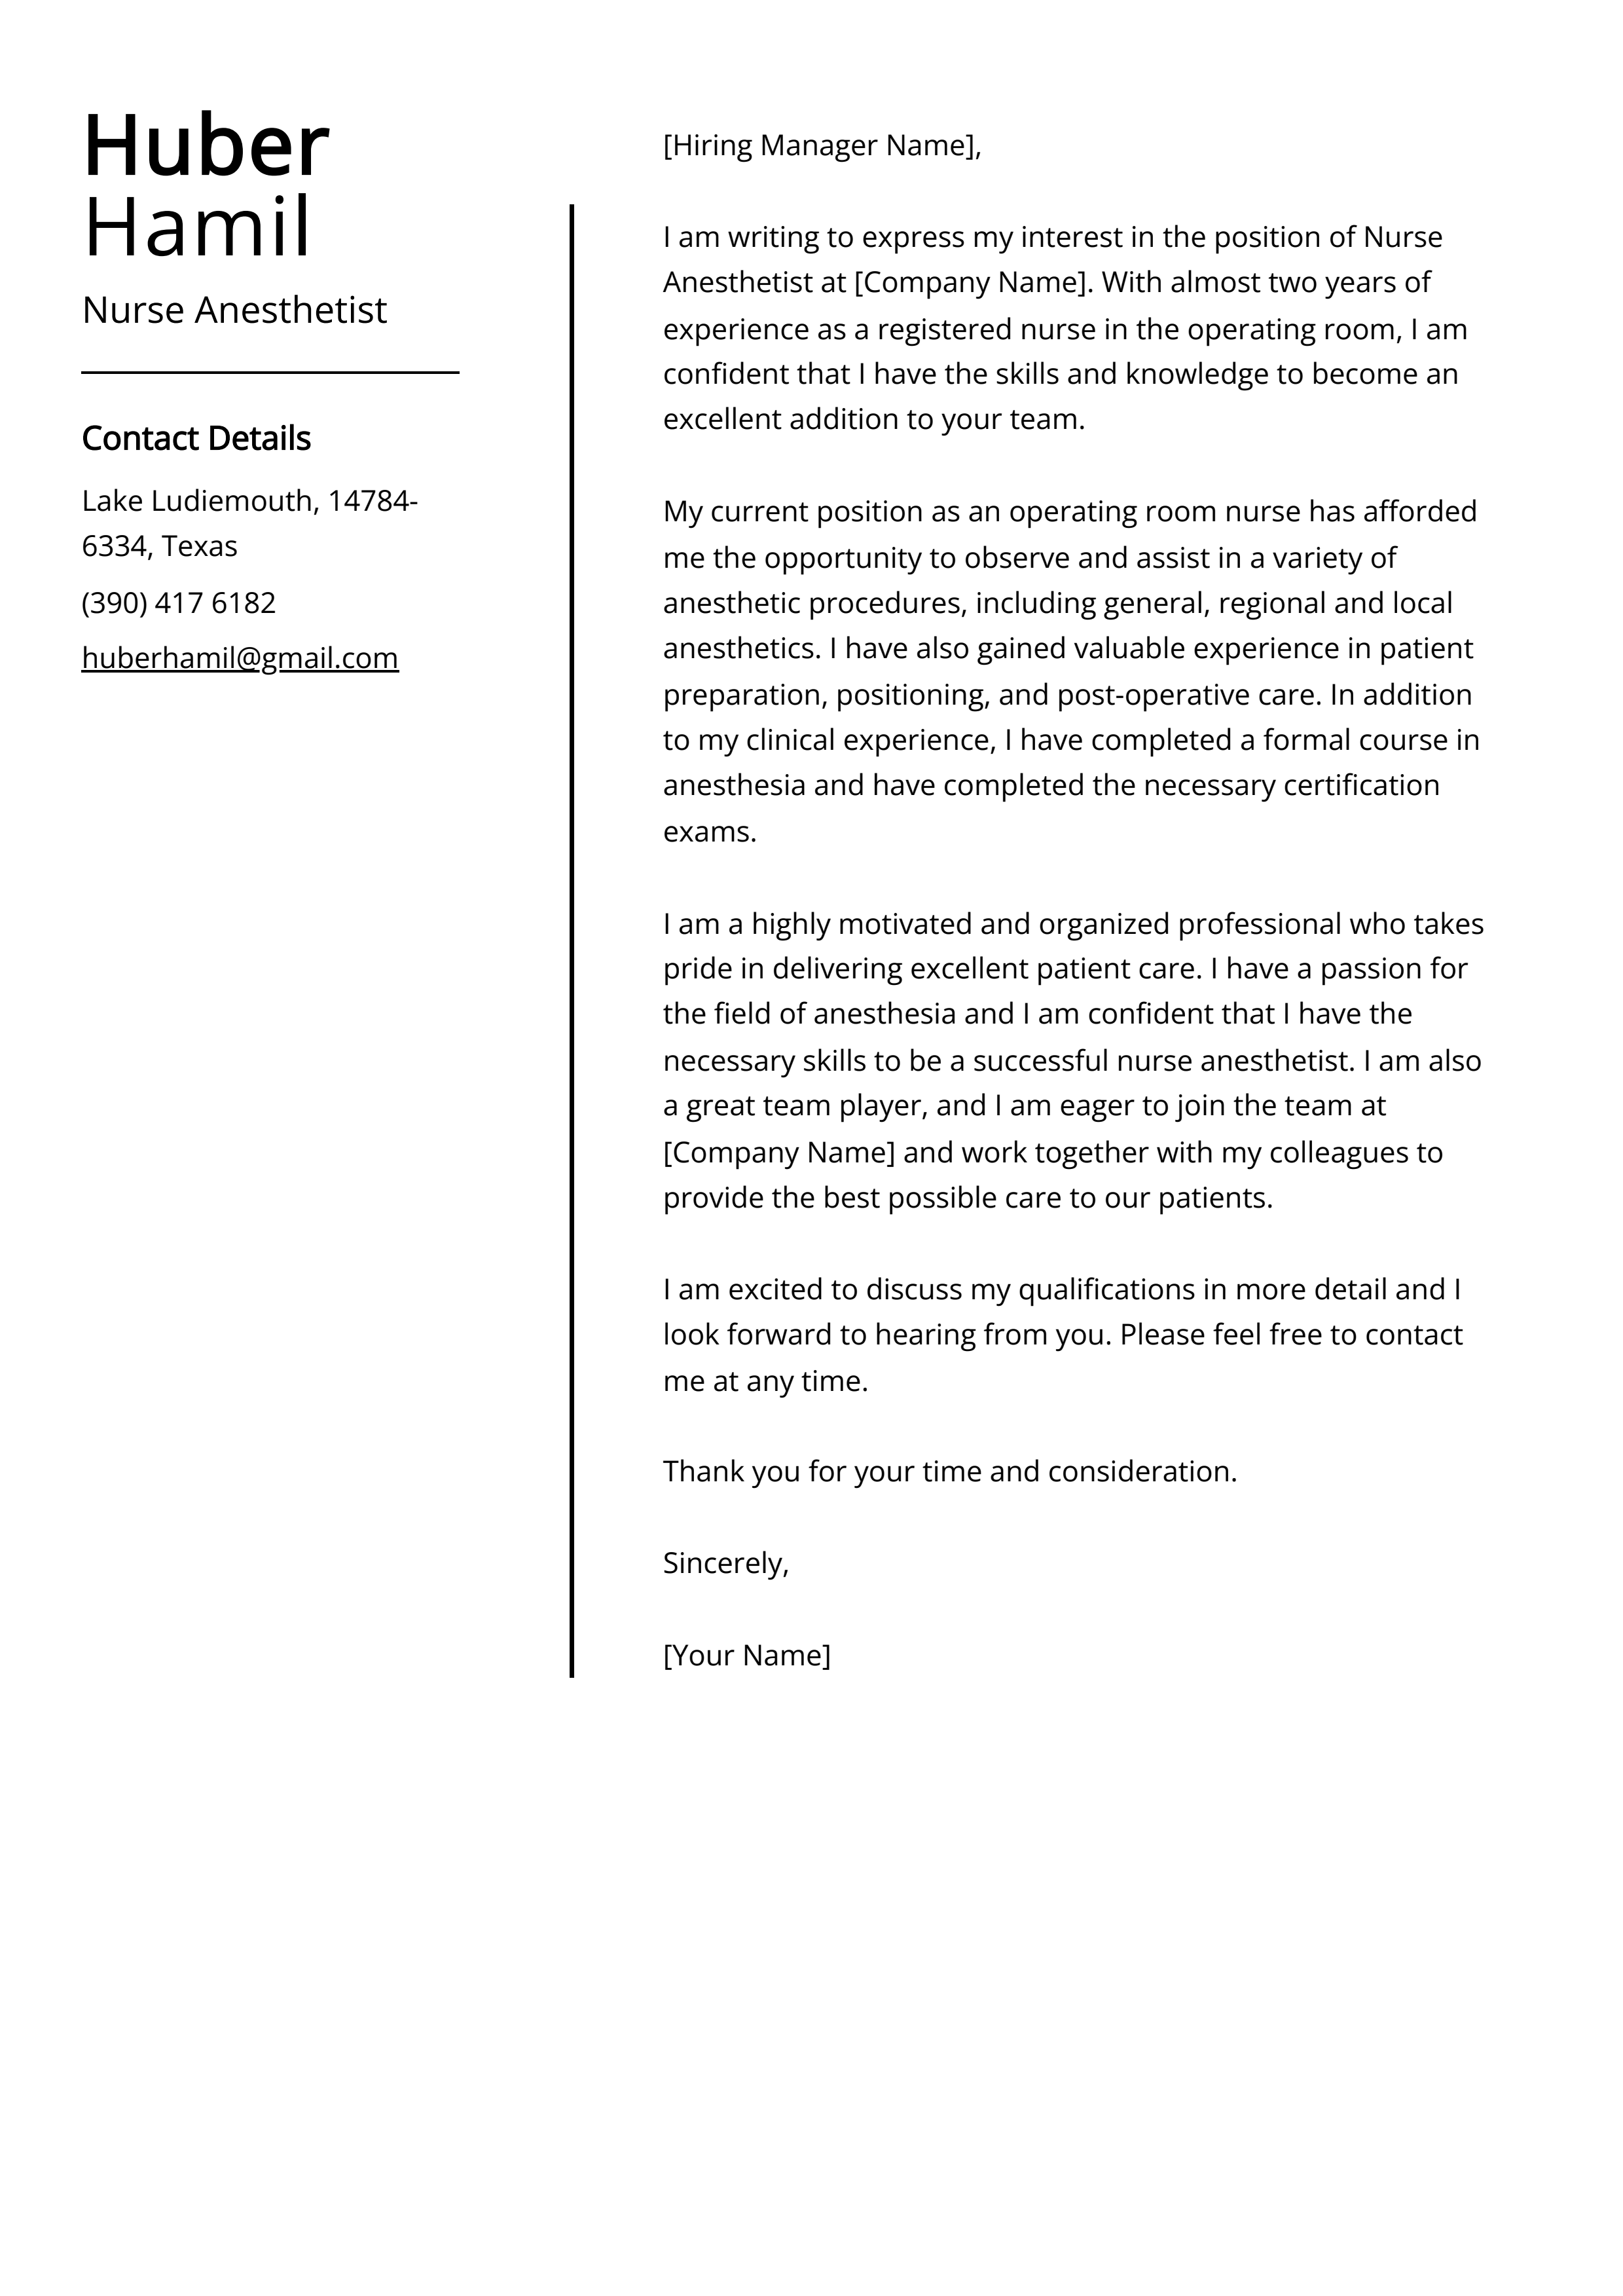 Nurse Anesthetist Cover Letter Example